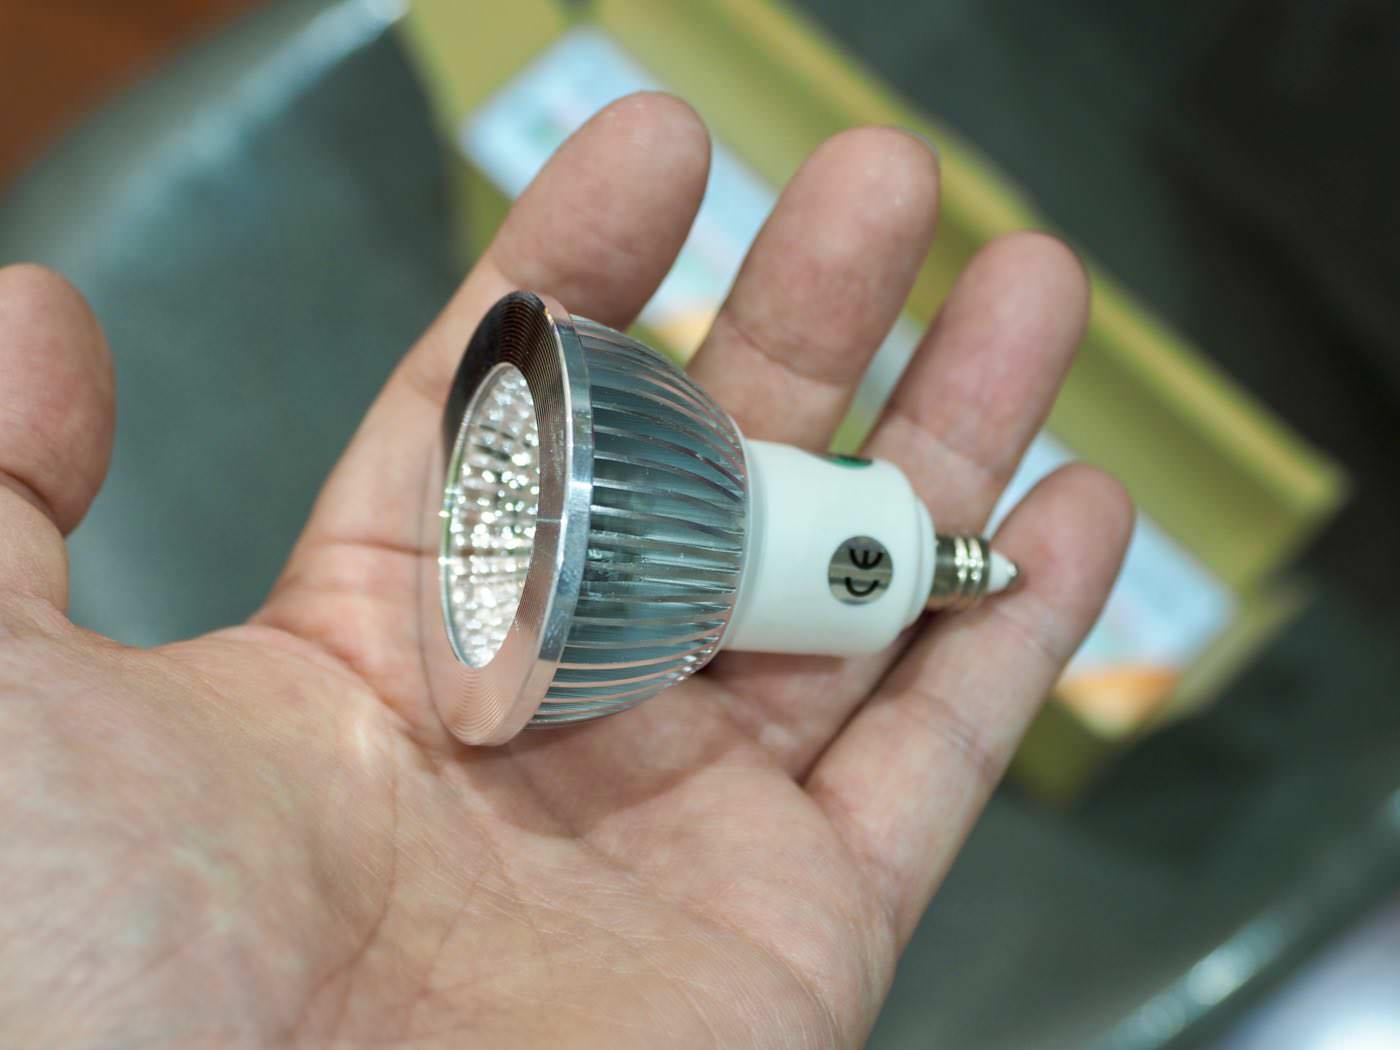 Replacement of halogen lamp with led light 00006